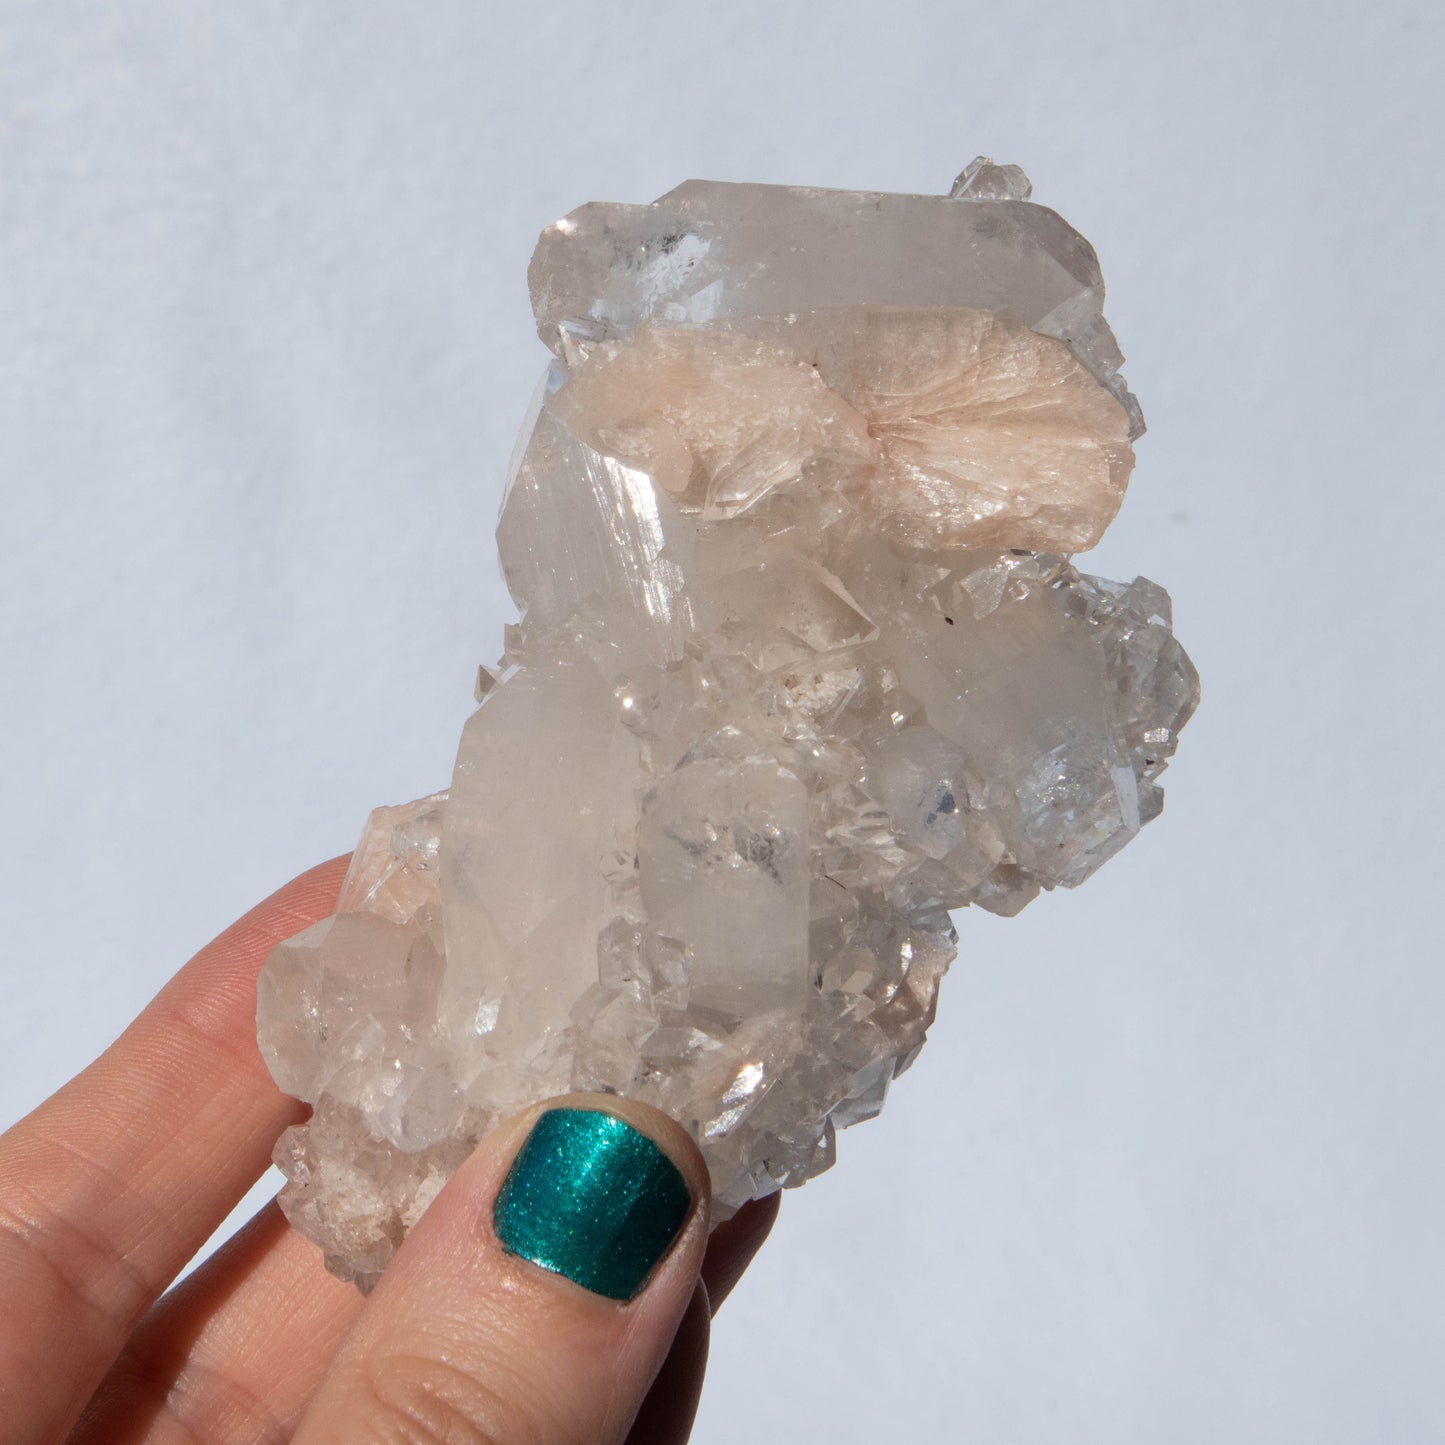 apophyllite, apophyllite cluster, apophyllite specimen, raw apophyllite specimen, raw apophyllite specimen, diamond apophyllite cluster, crystal specimen, raw crystal, raw crystal specimen, gemstone specimen, apophyllite crystal, apophyllite stone, apophyllite properties, apophyllite healing properties, apophyllite metaphysical properties, apophyllite meaning